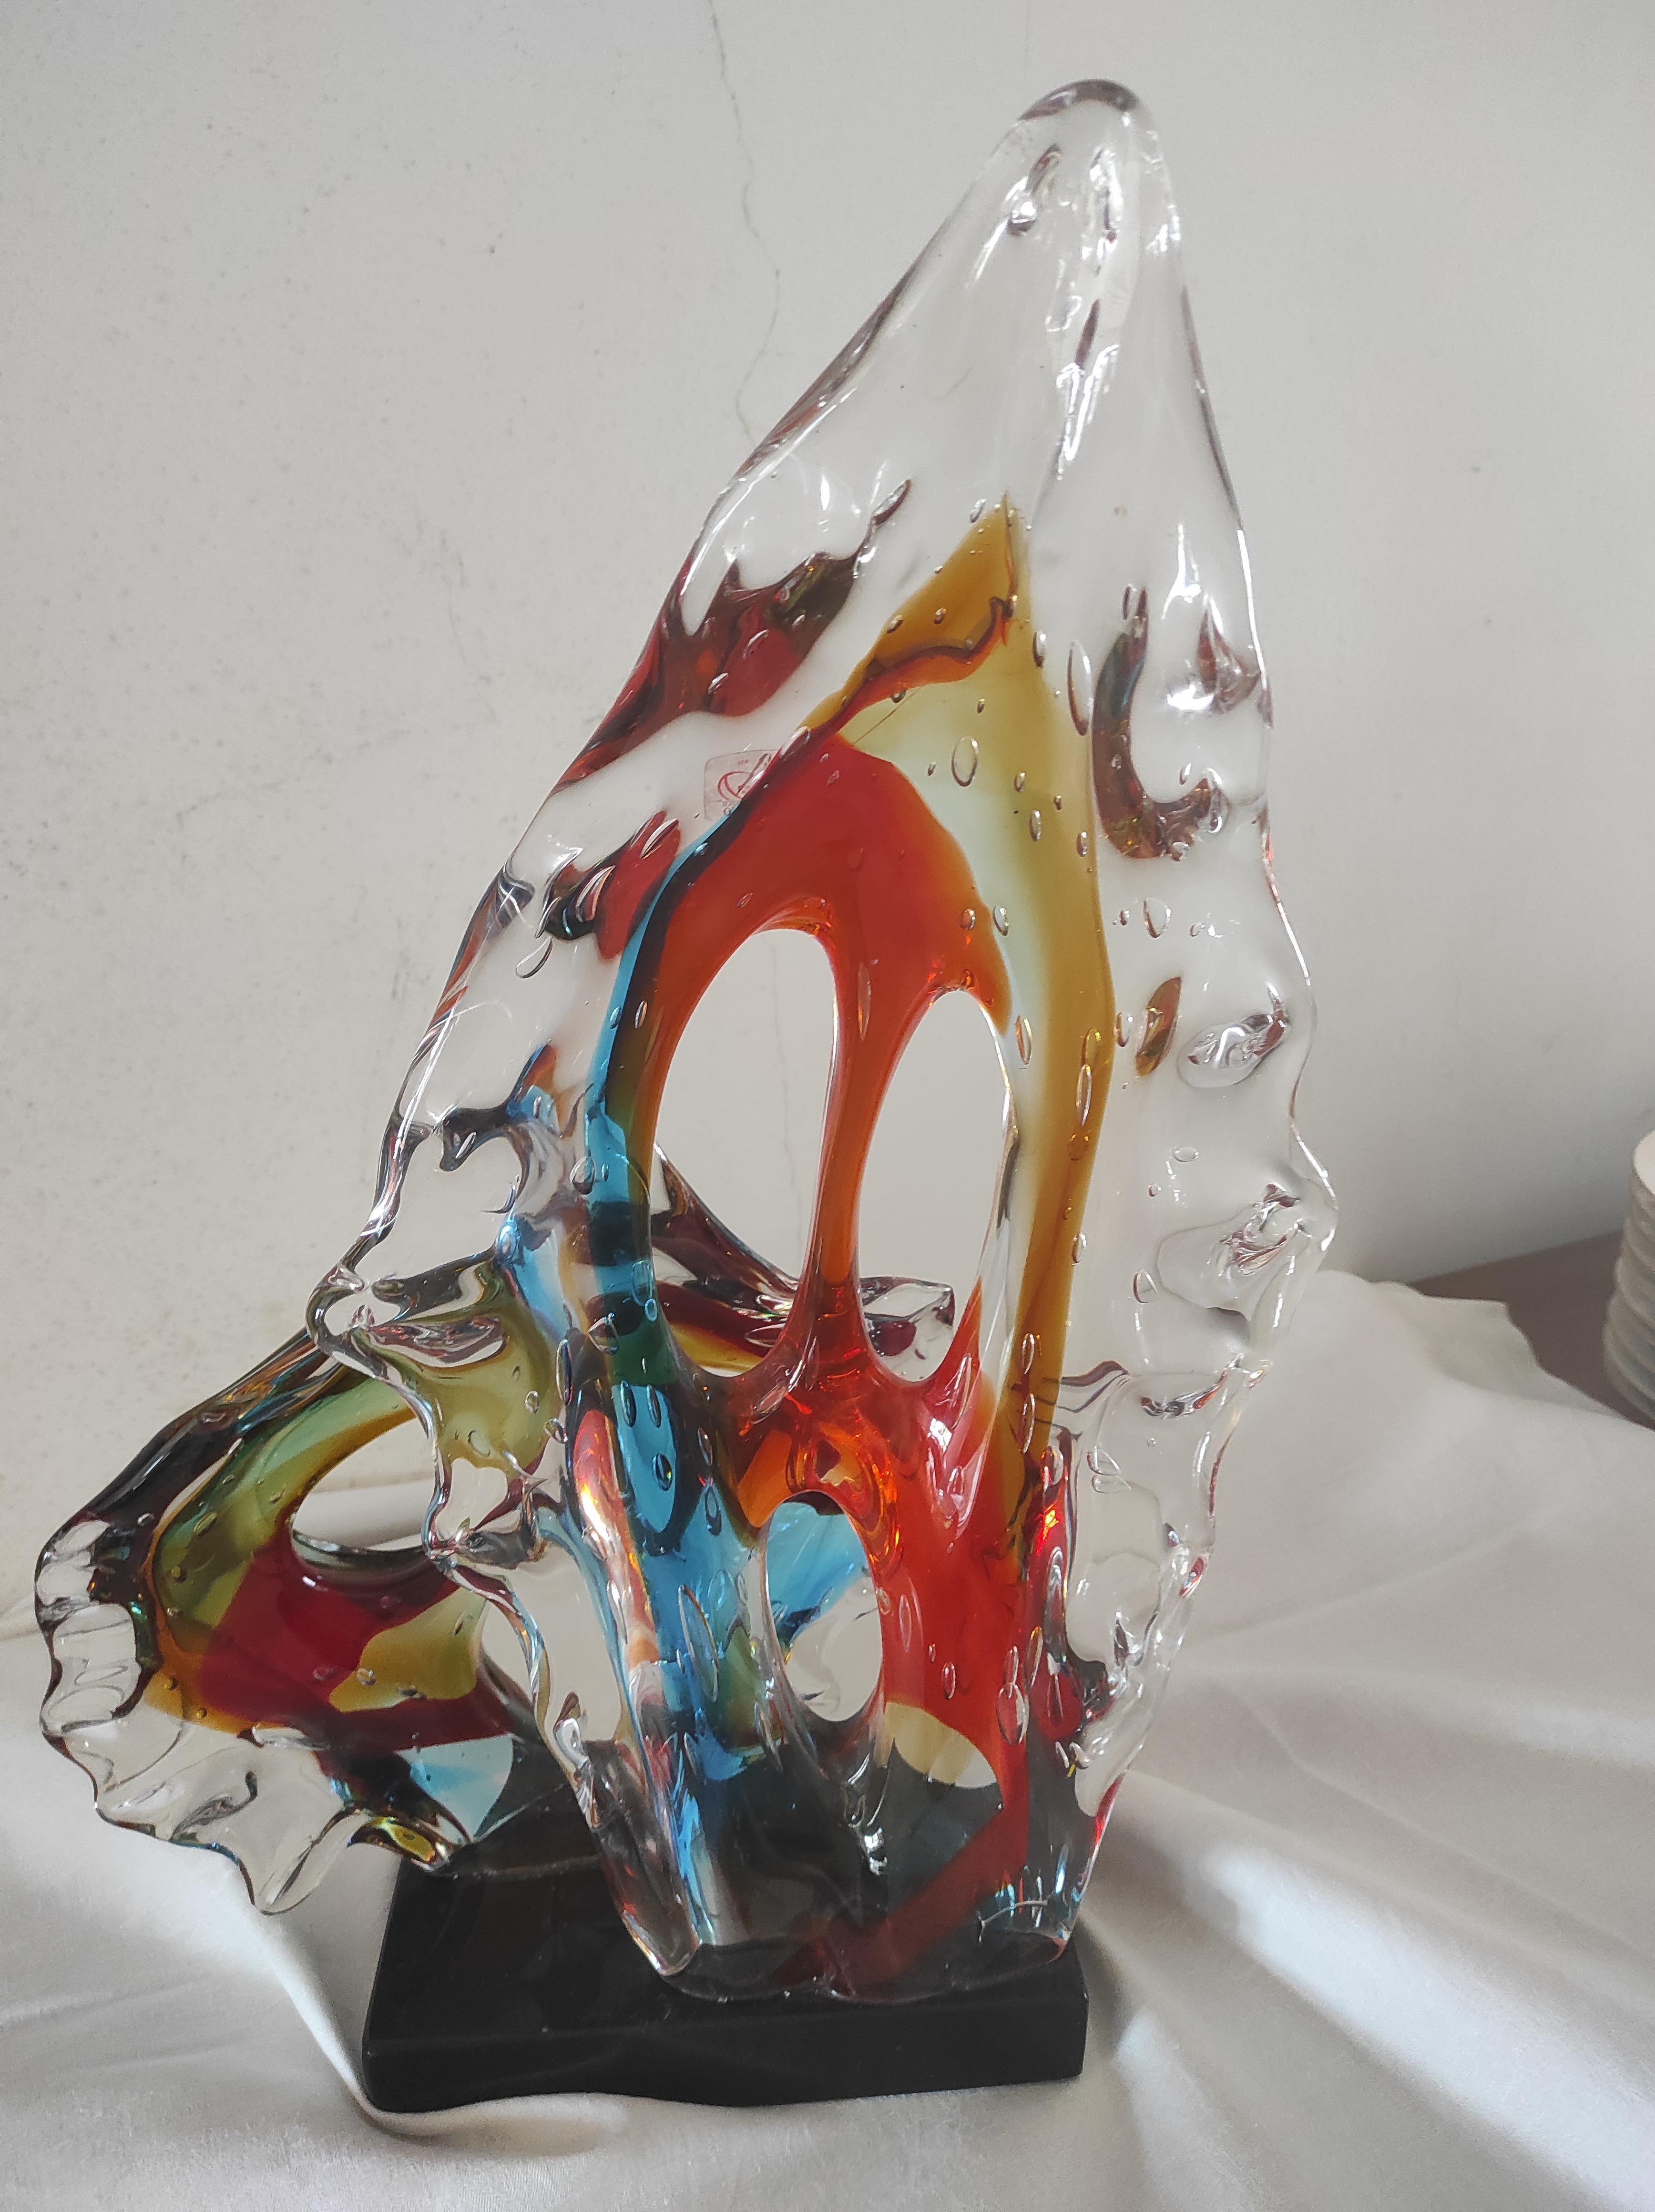 Murano blown glass sculpture created by master glassmaker Sergio Costantini.
Tribute to painter Edvard Munch and his famous work depicting anxiety.
This work is signed by the master on the lower part precisely on the base
It is intact and has not